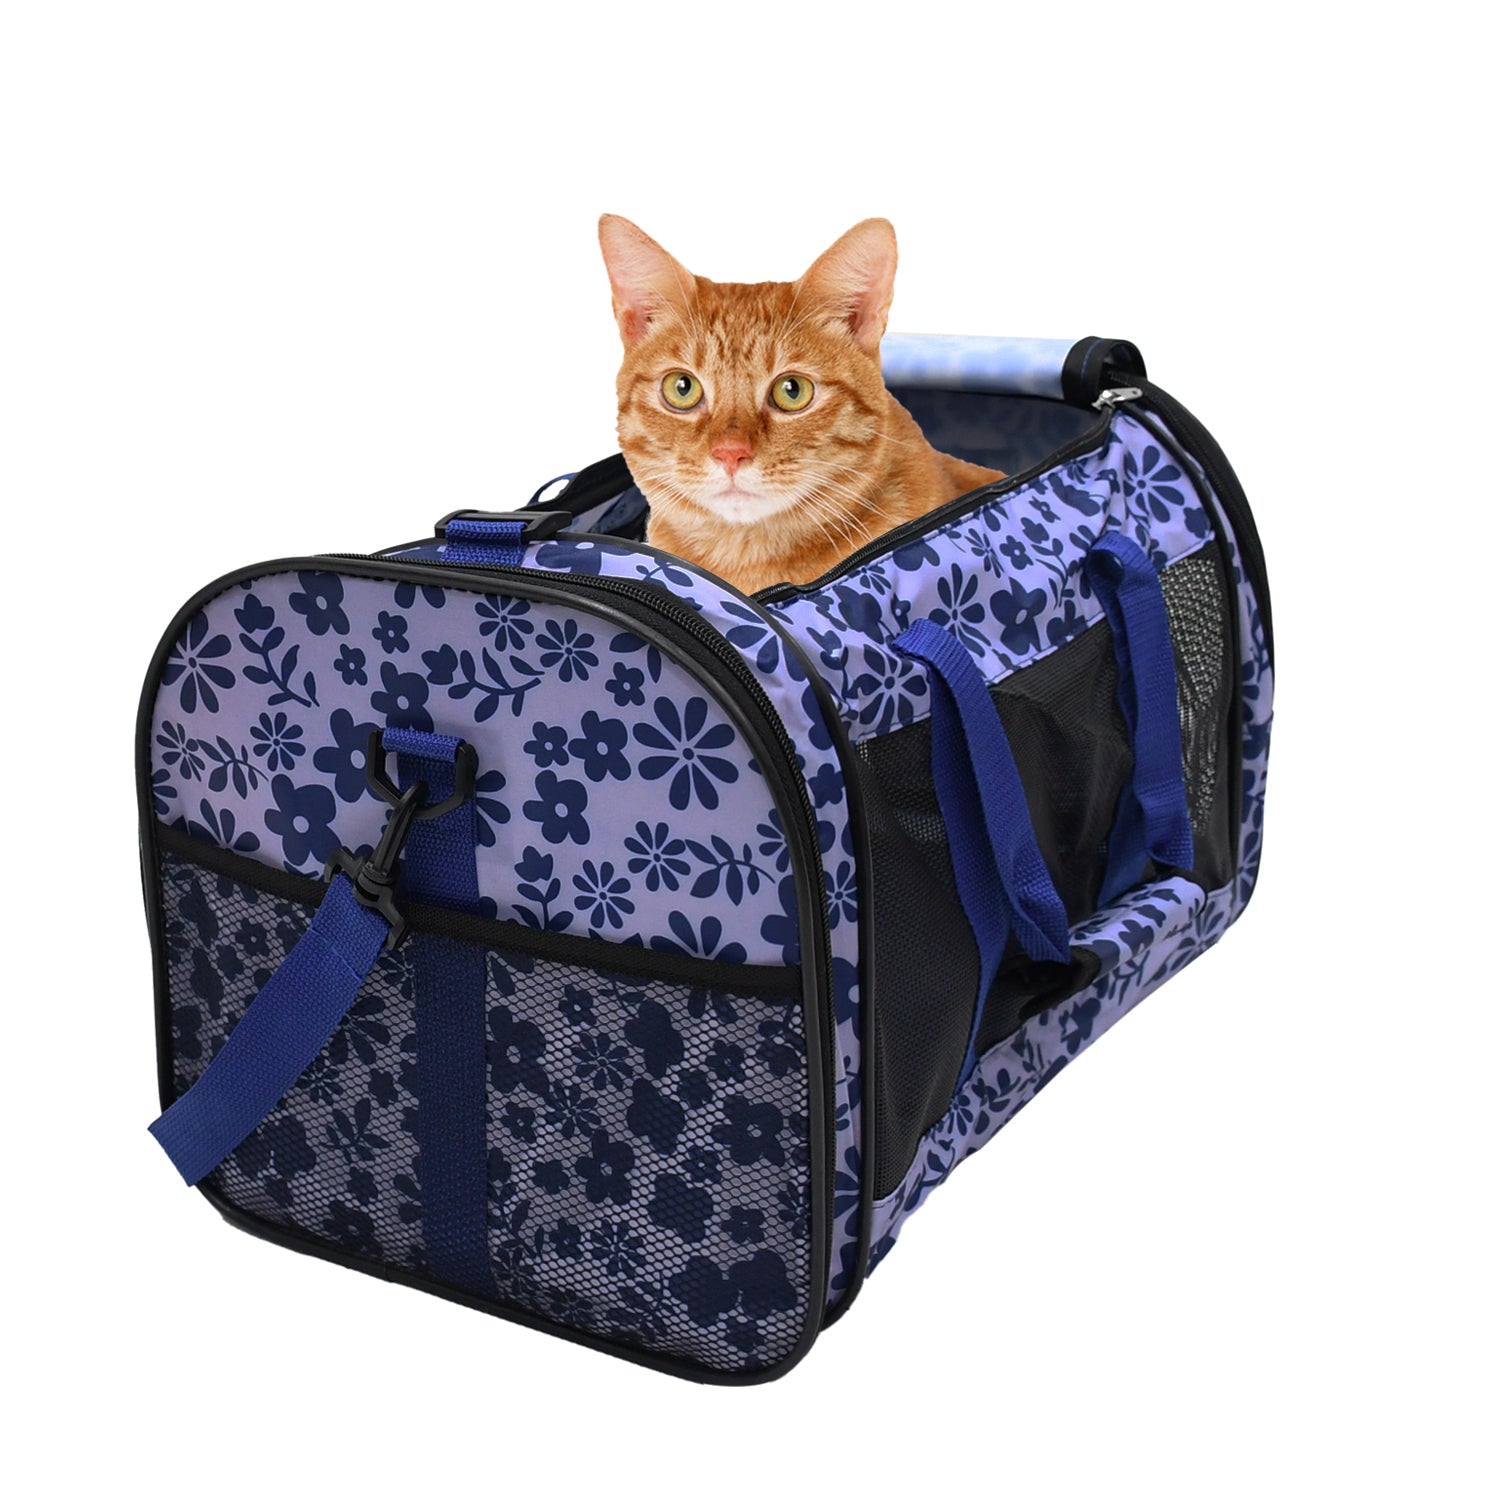 GOOPAWS Soft-Sided Small Dog Cat Carrier Bag, Floral Print Blue, 19''